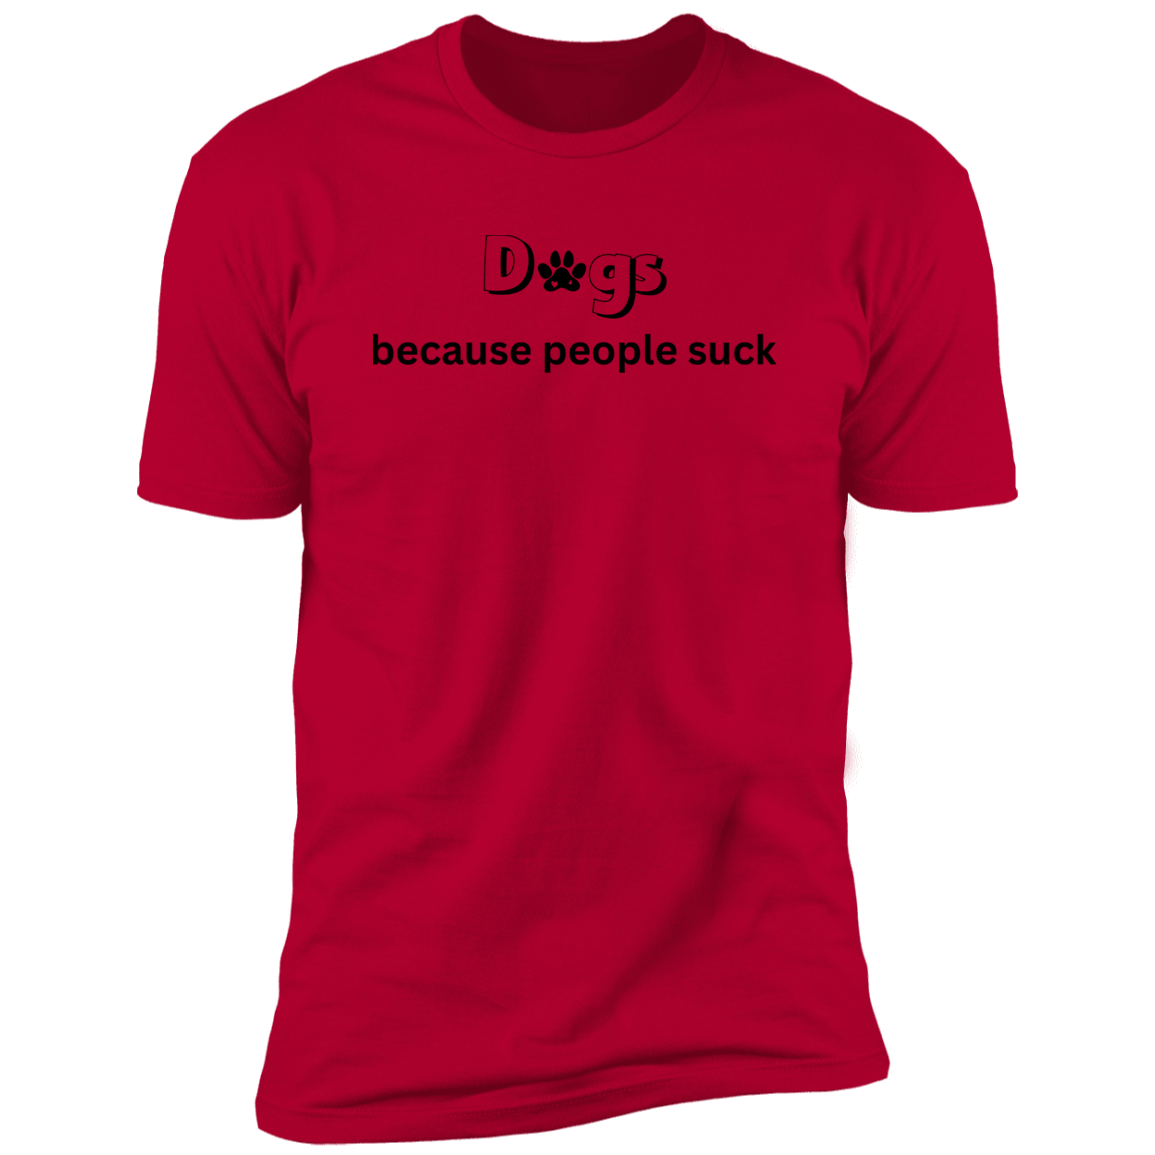 Dogs Because People Such t-shirt, funny dog shirt for humans, in red